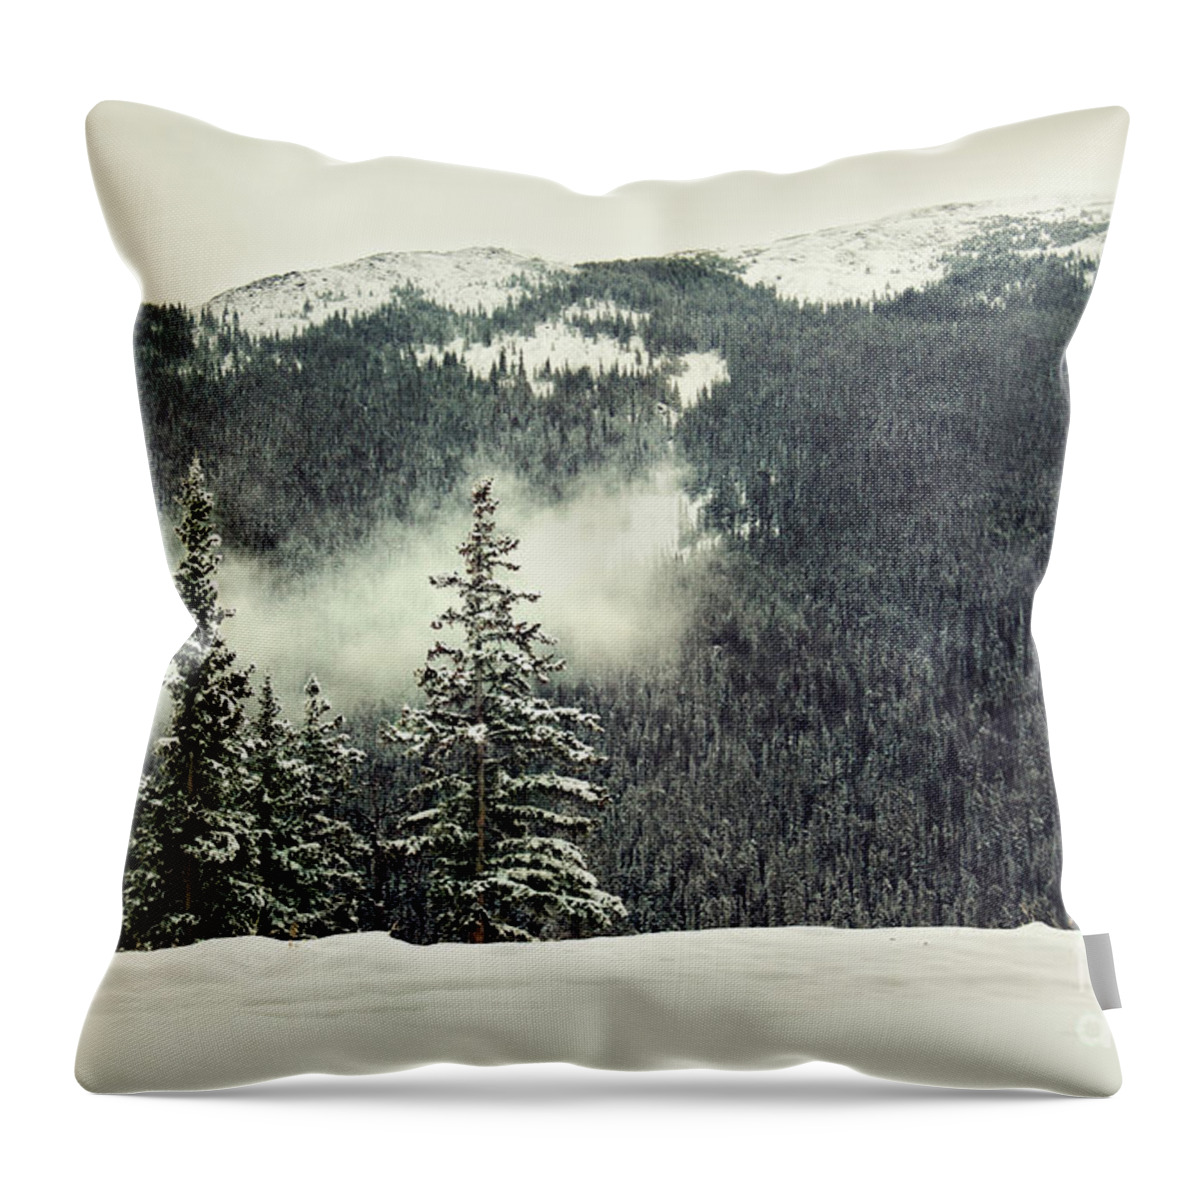 Colorado Throw Pillow featuring the photograph In The Beginning by Dana DiPasquale